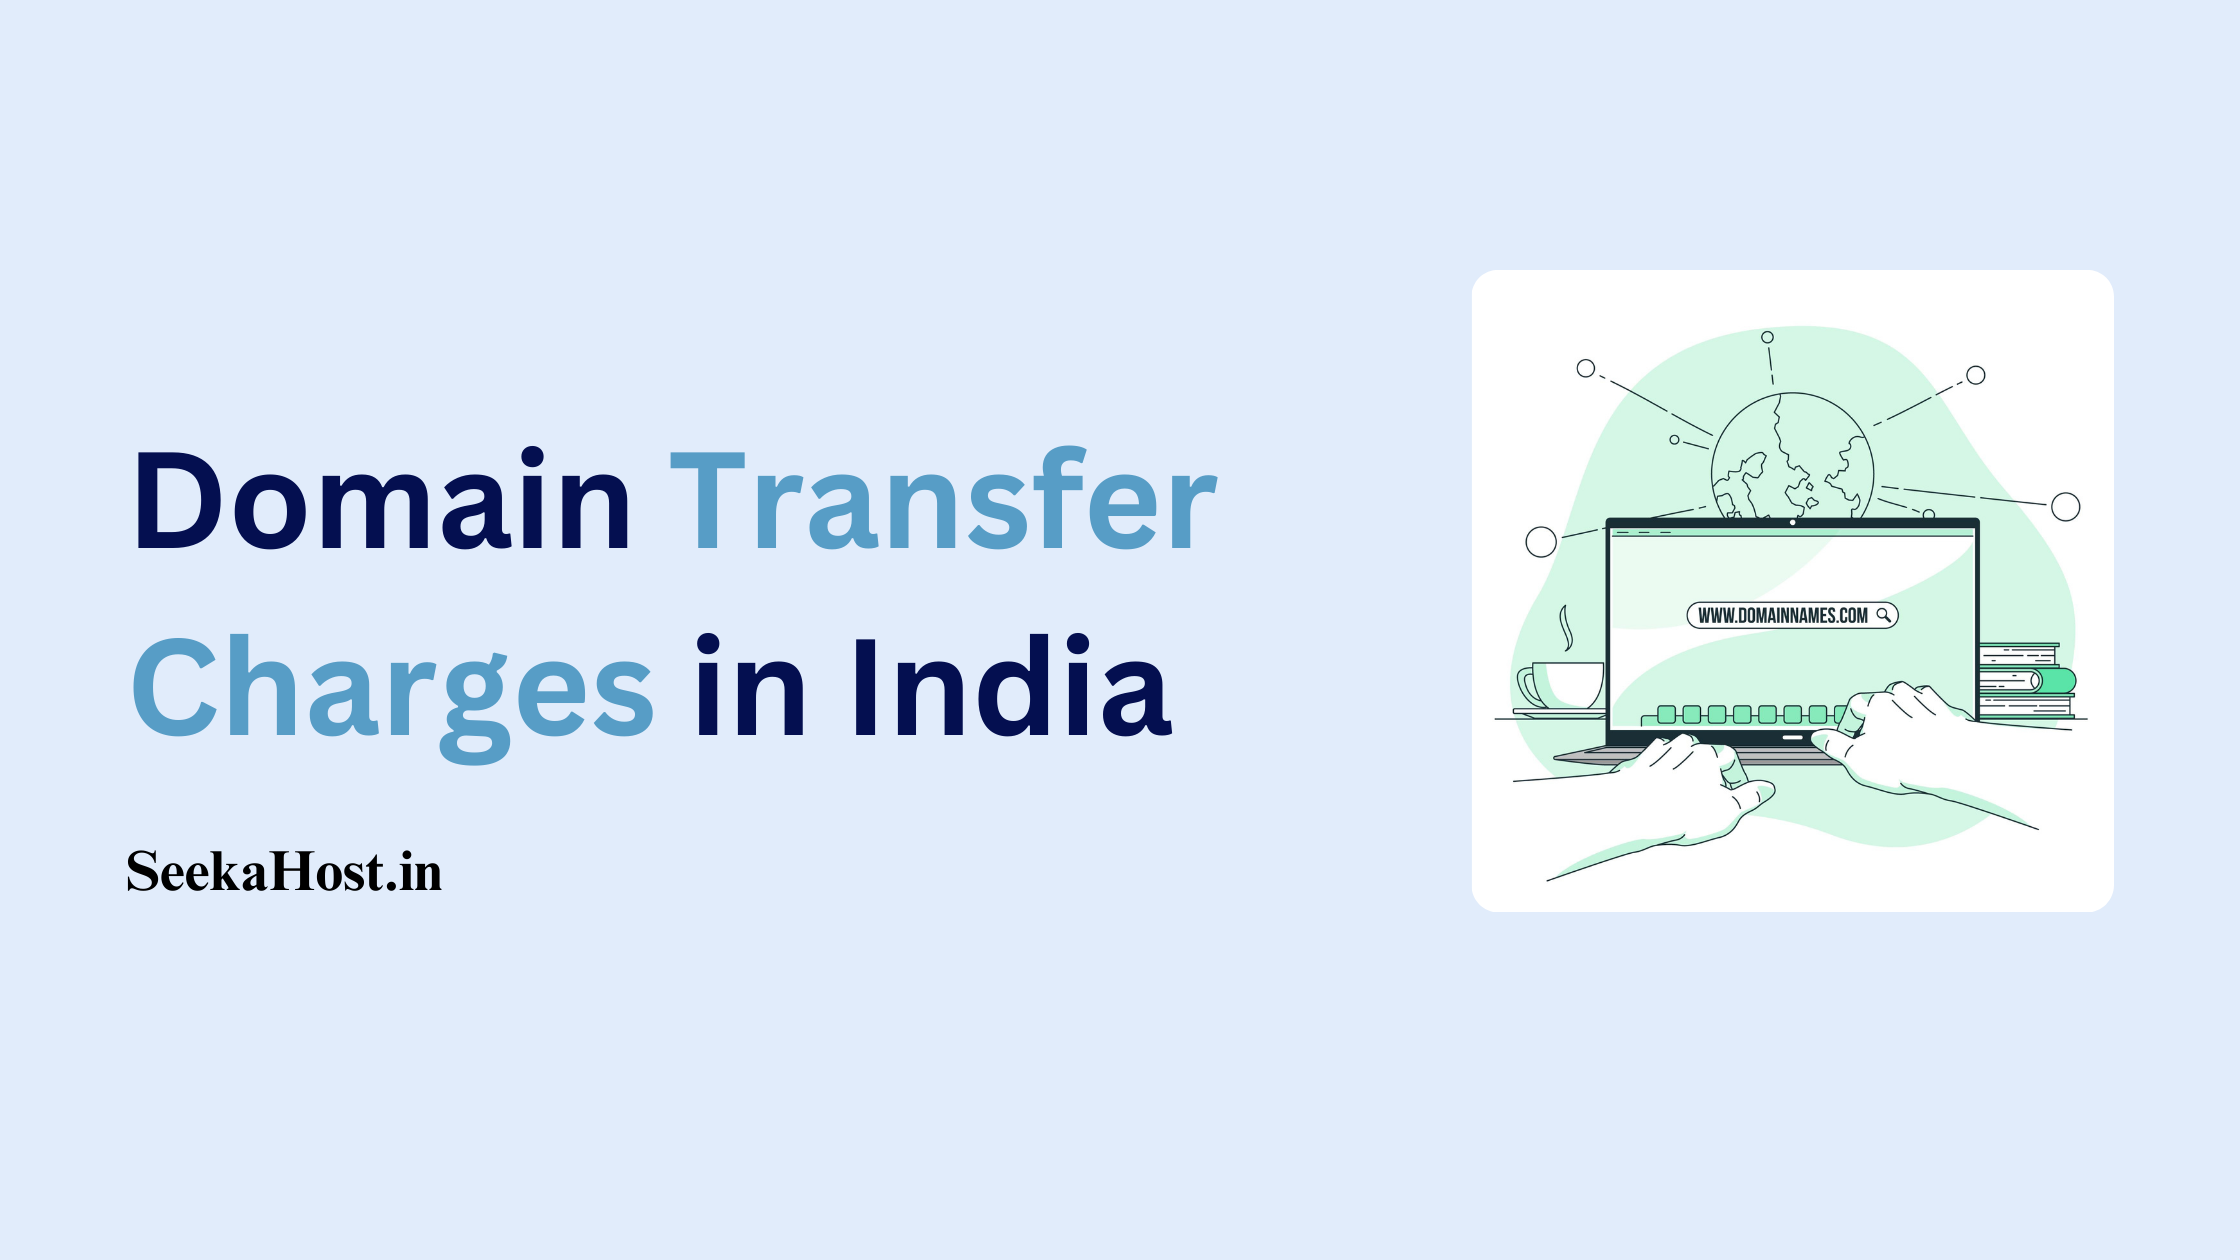 Domain Transfer Charges in India